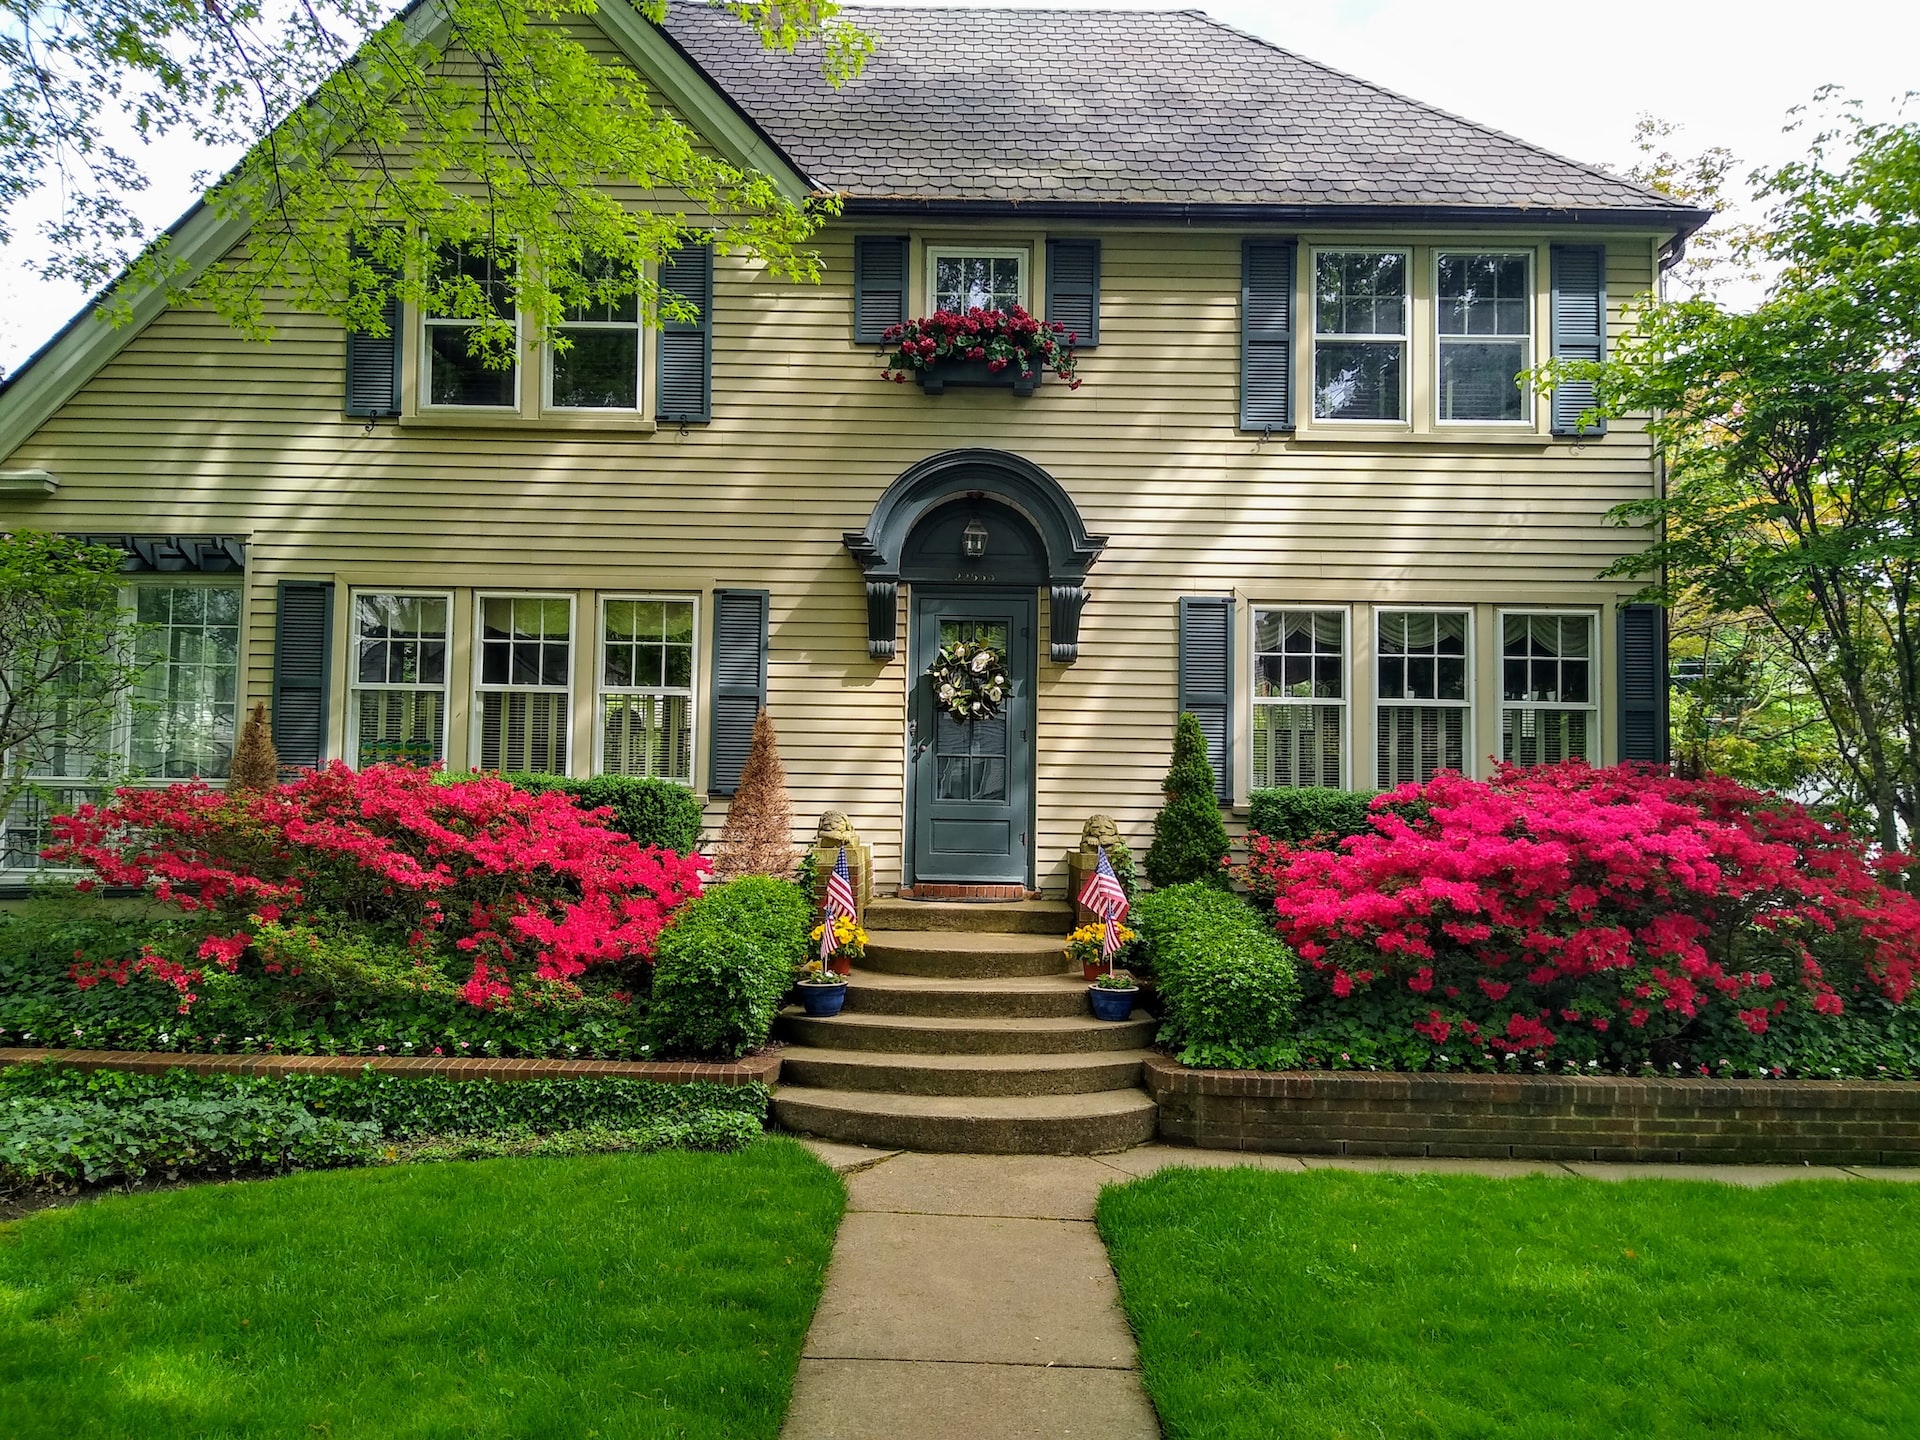 Try These Inspirational Decor Ideas to Improve the Curb Appeal of Your Home